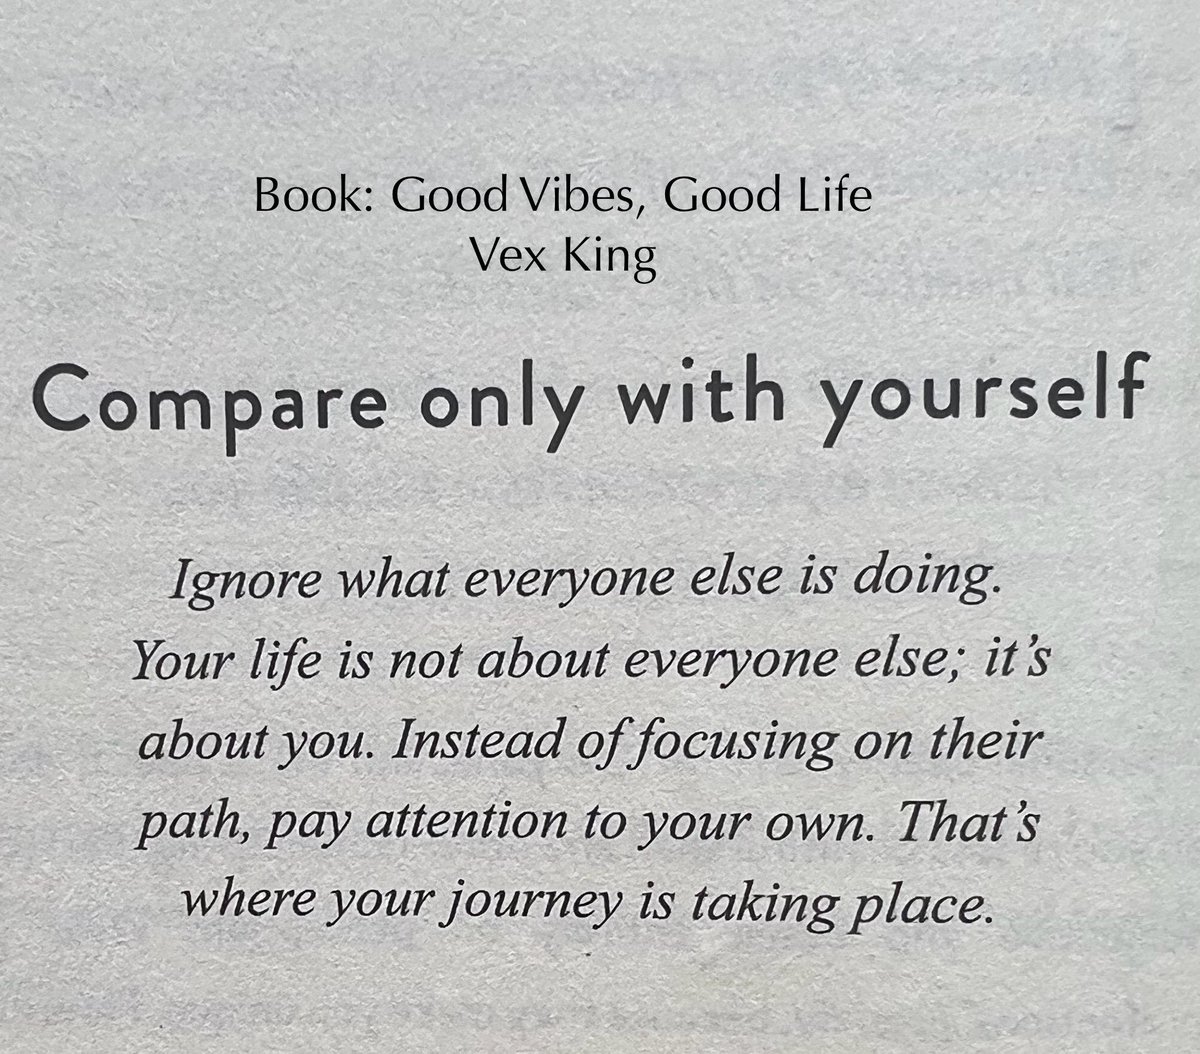 #vexwwksingbook #goodvibesgoodlife #books #readingtime #reading #library #wisdom #learning #knowledge #compare #instead #attention #journey #focusing #Saturdays #weekends #readmore #morningroutine #saturdayreading #weekendreads